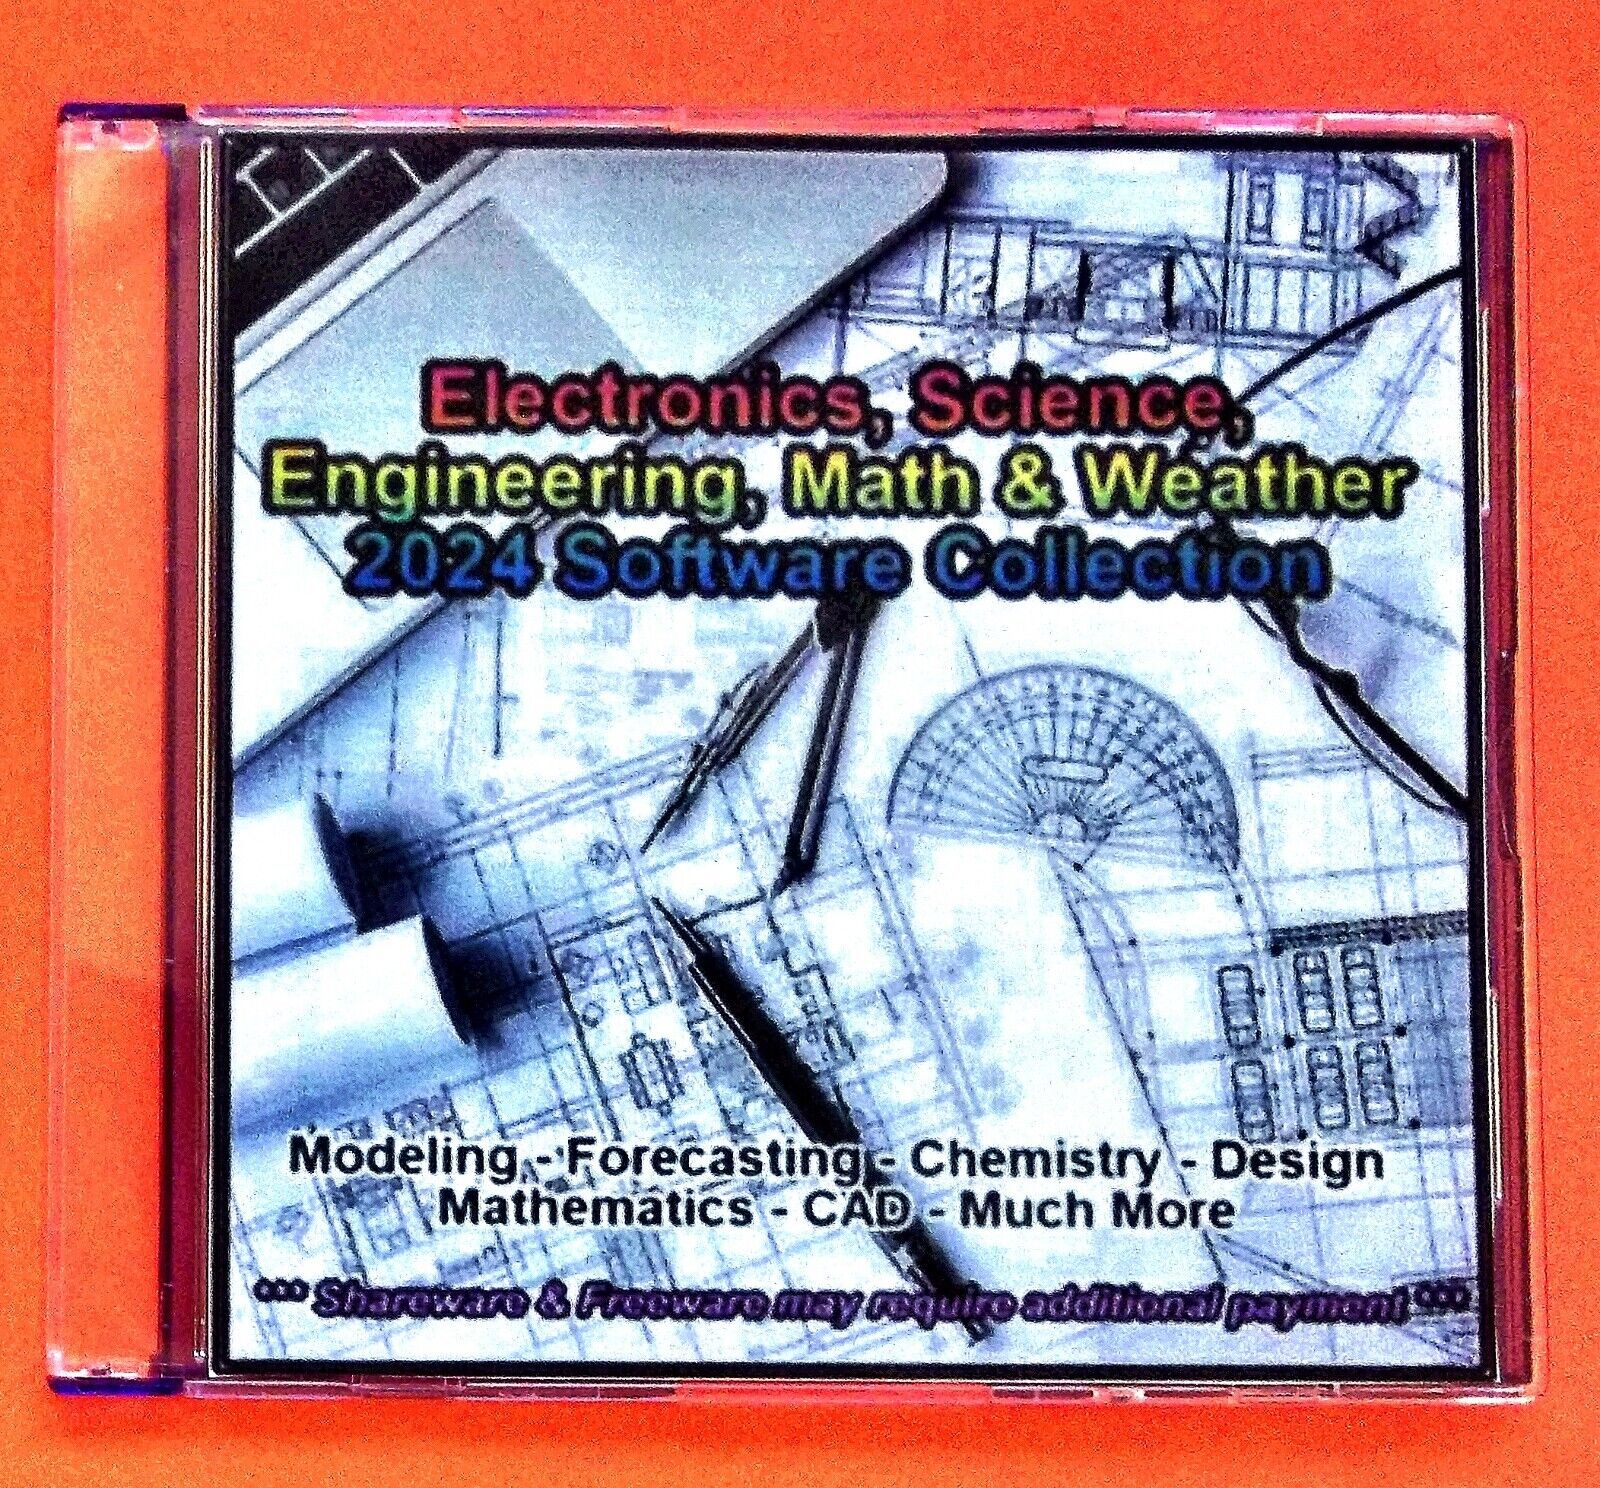 2024 Science, Electronics, Engineering & Weather DVD - NEW Sealed Software